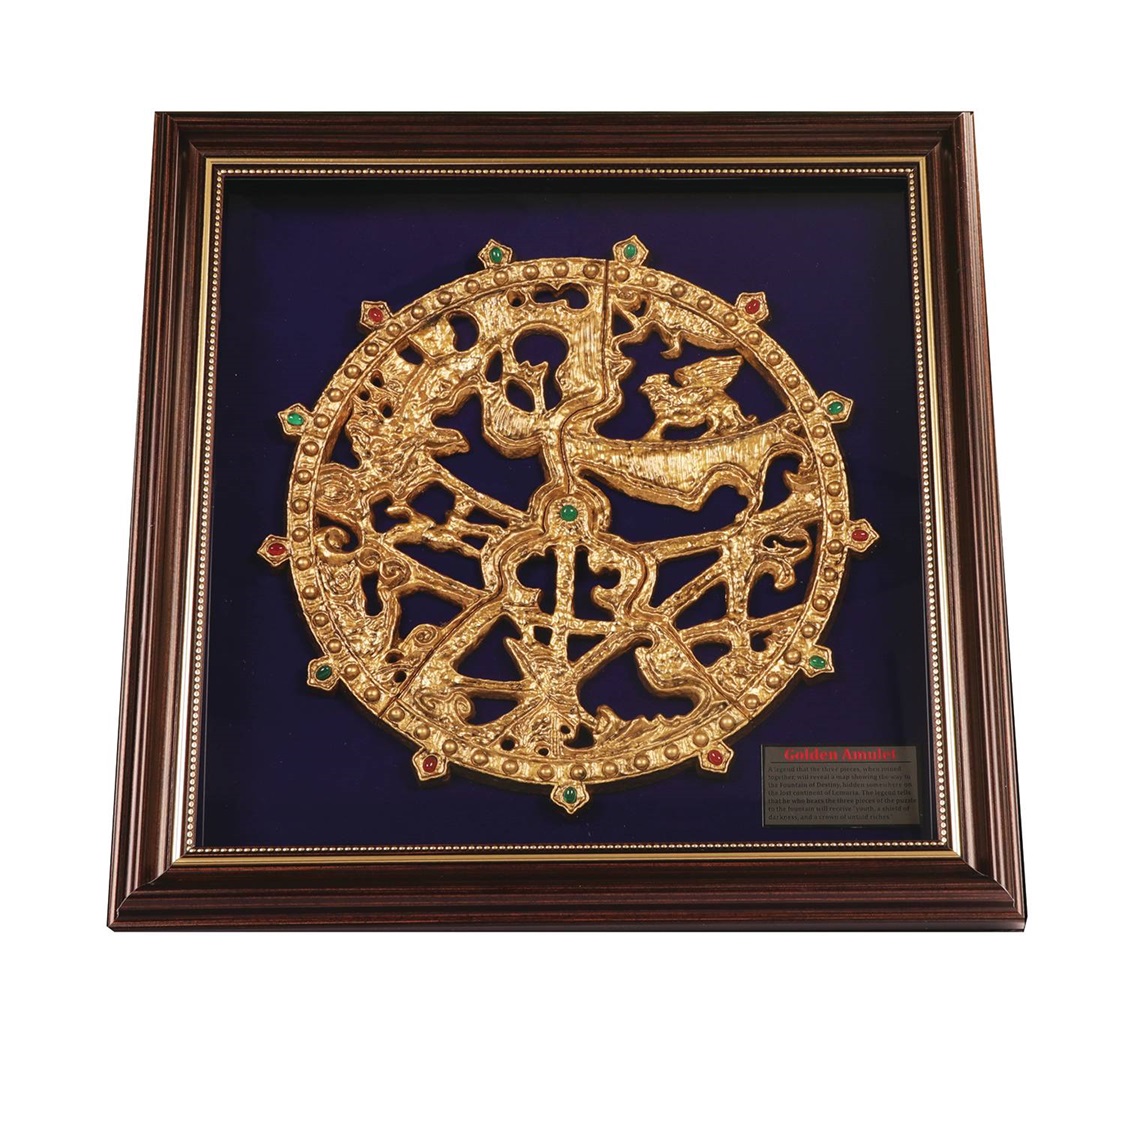 The Golden Voyage of Sinbad 1:1 Scale Golden Amulet Prop Replica 